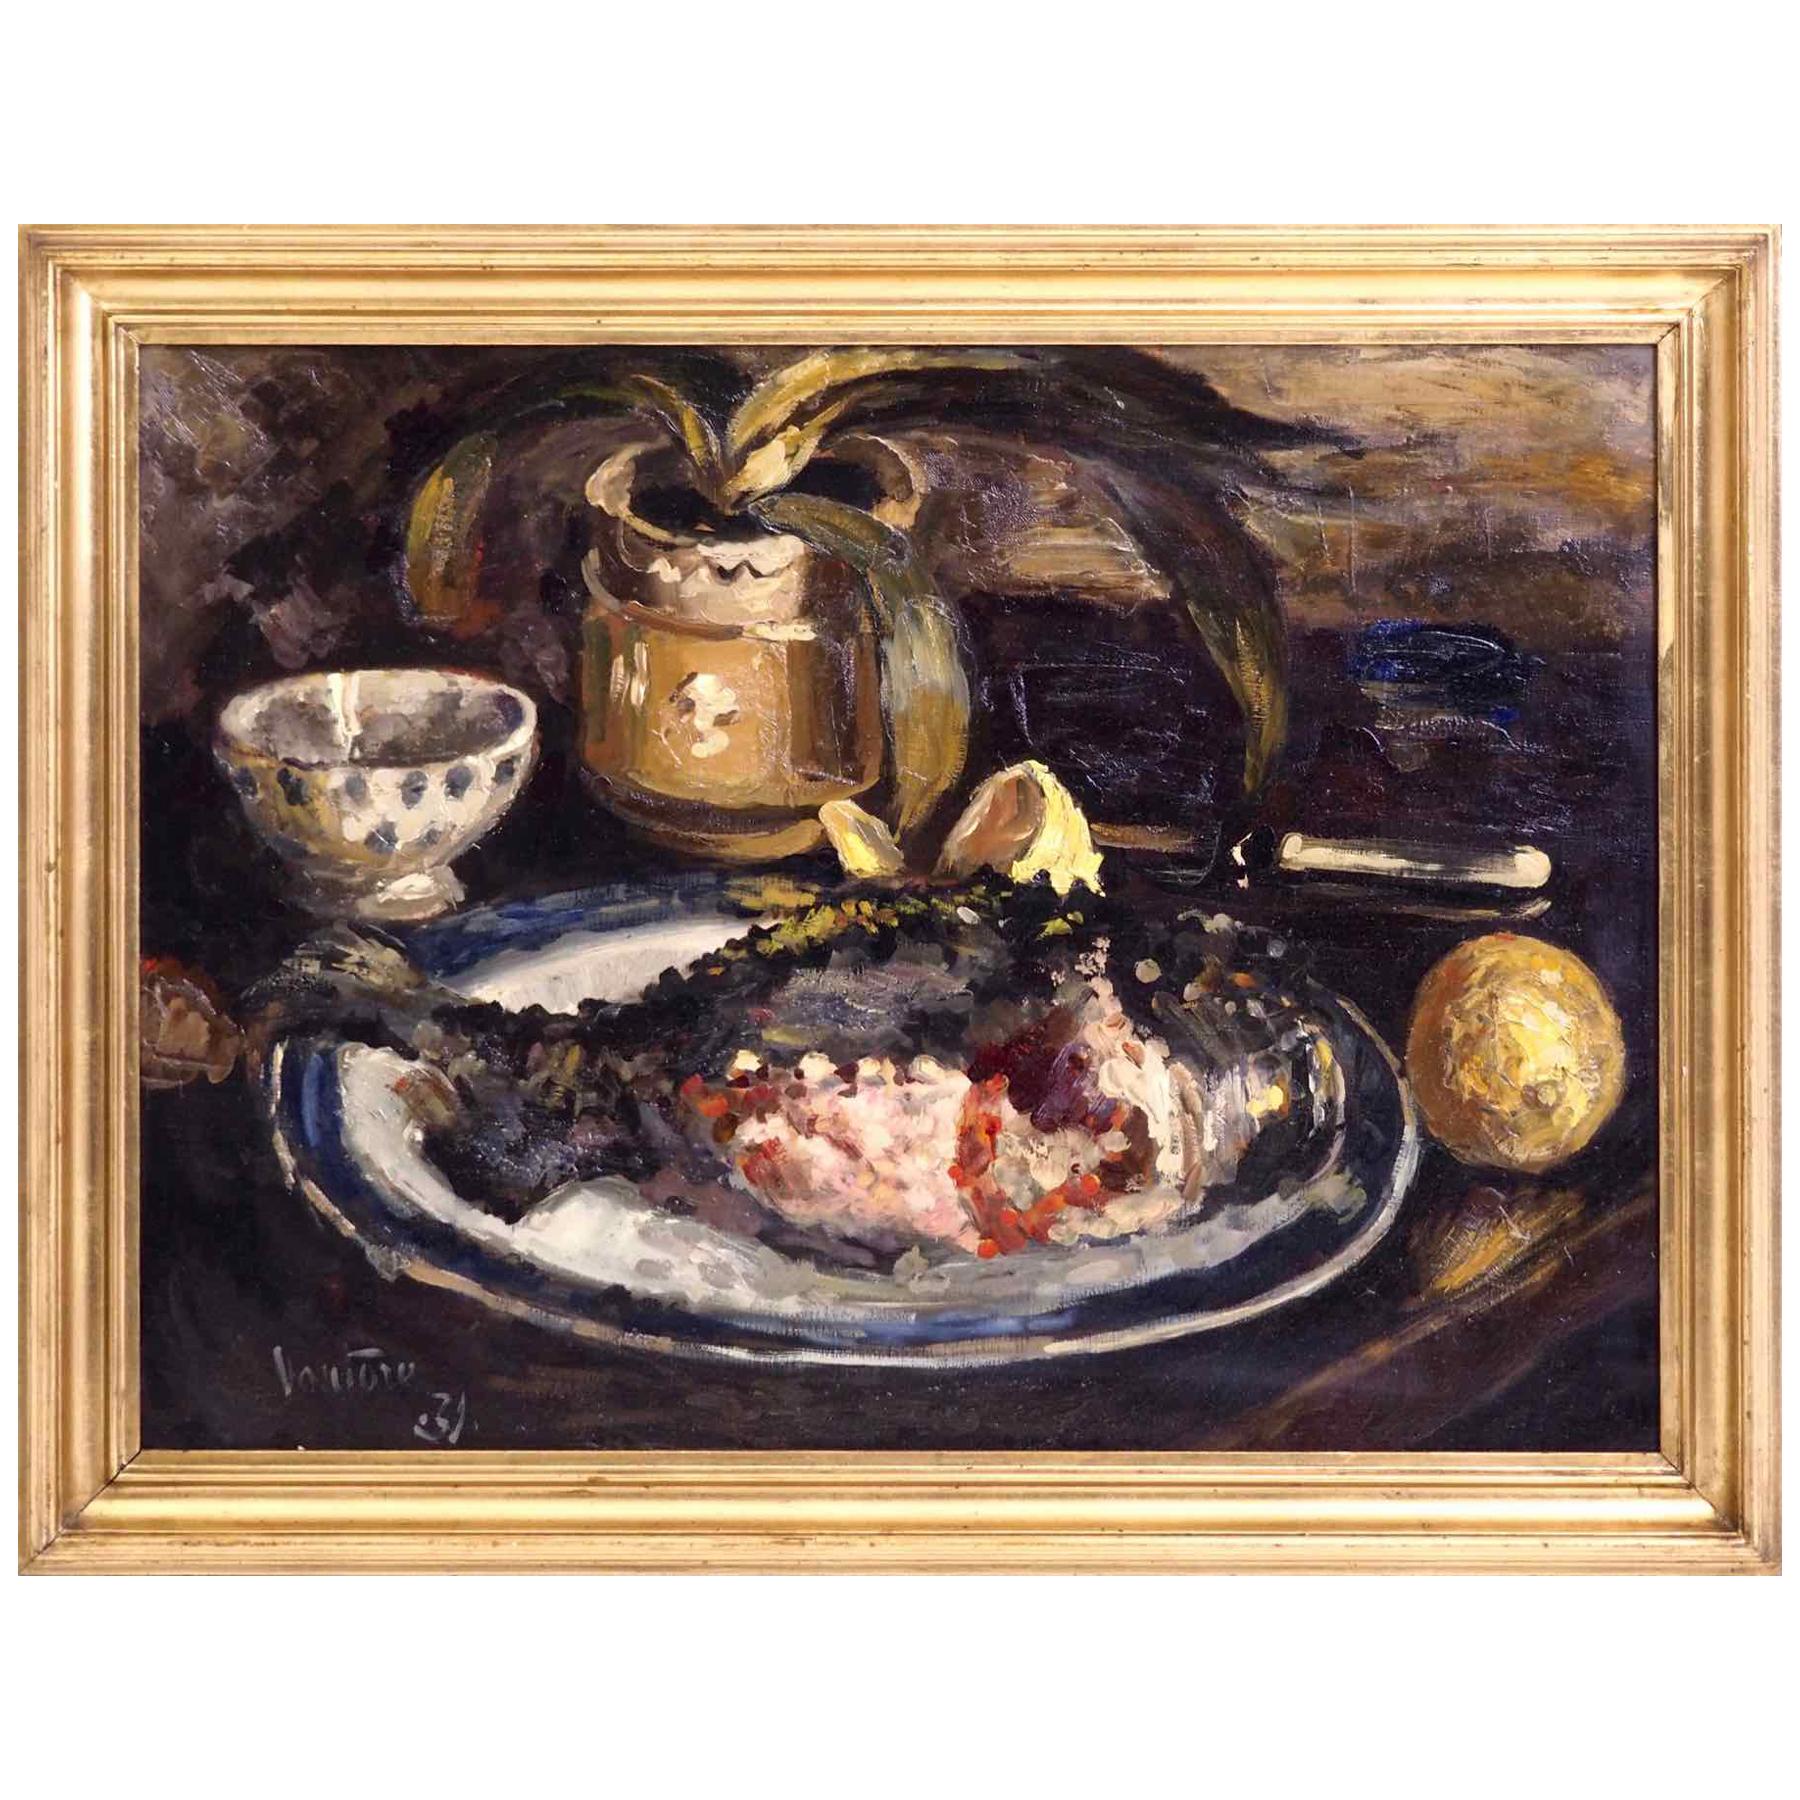 Fine Nature Morte Painting, Signed and Dated '31, Oil on Canvas